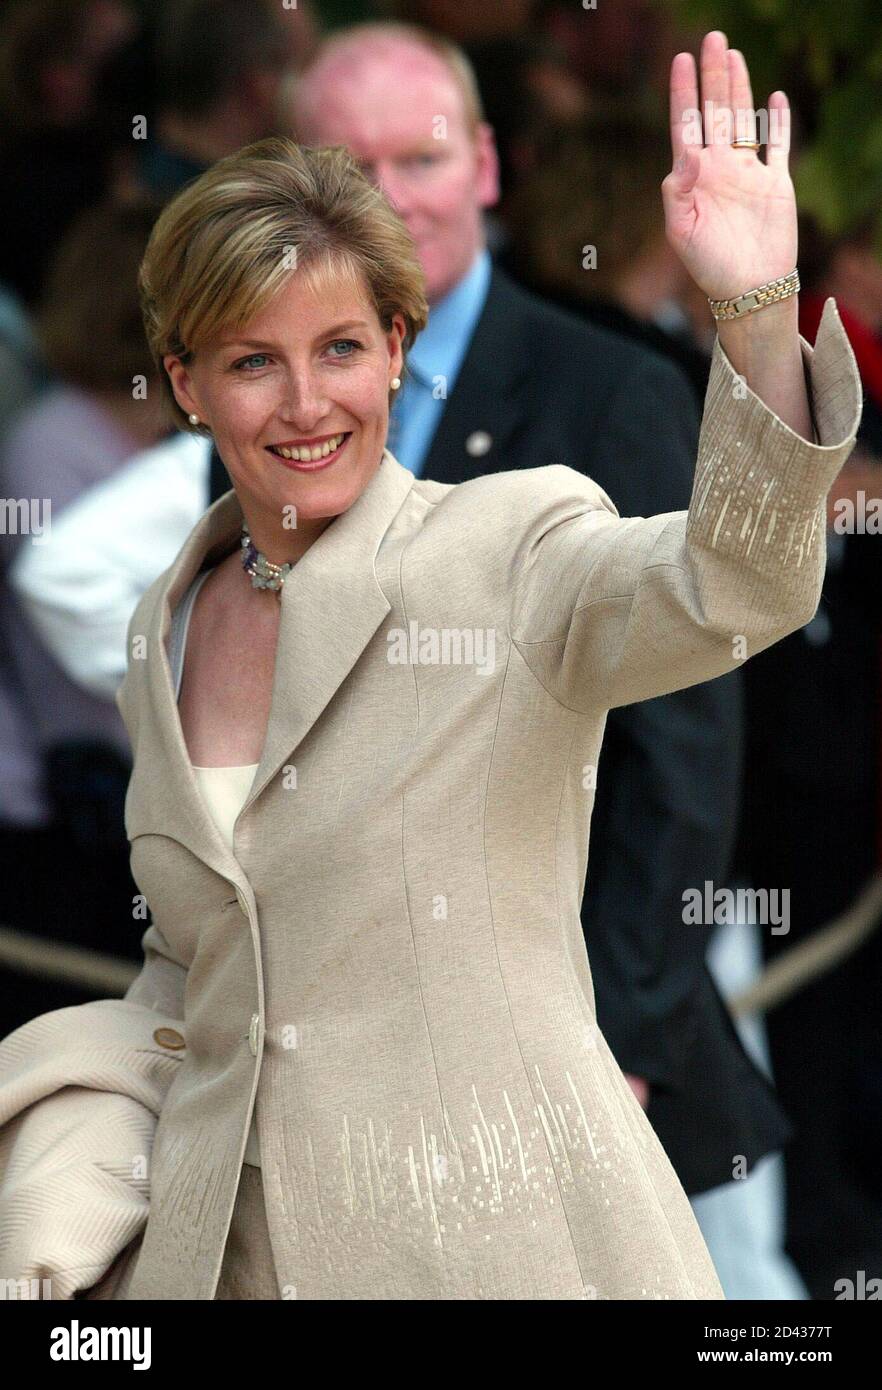 britains-countess-of-wessex-arrives-for-the-golden-jubilee-pop-concert-in-buckingham-palace-london-june-3-2002-around-12000-members-of-the-public-attended-the-concert-hosted-by-britains-queen-elizabeth-ii-which-featured-music-from-sir-paul-mccartney-eric-clapton-aretha-franklin-and-tom-jones-among-others-2d4377t.jpg